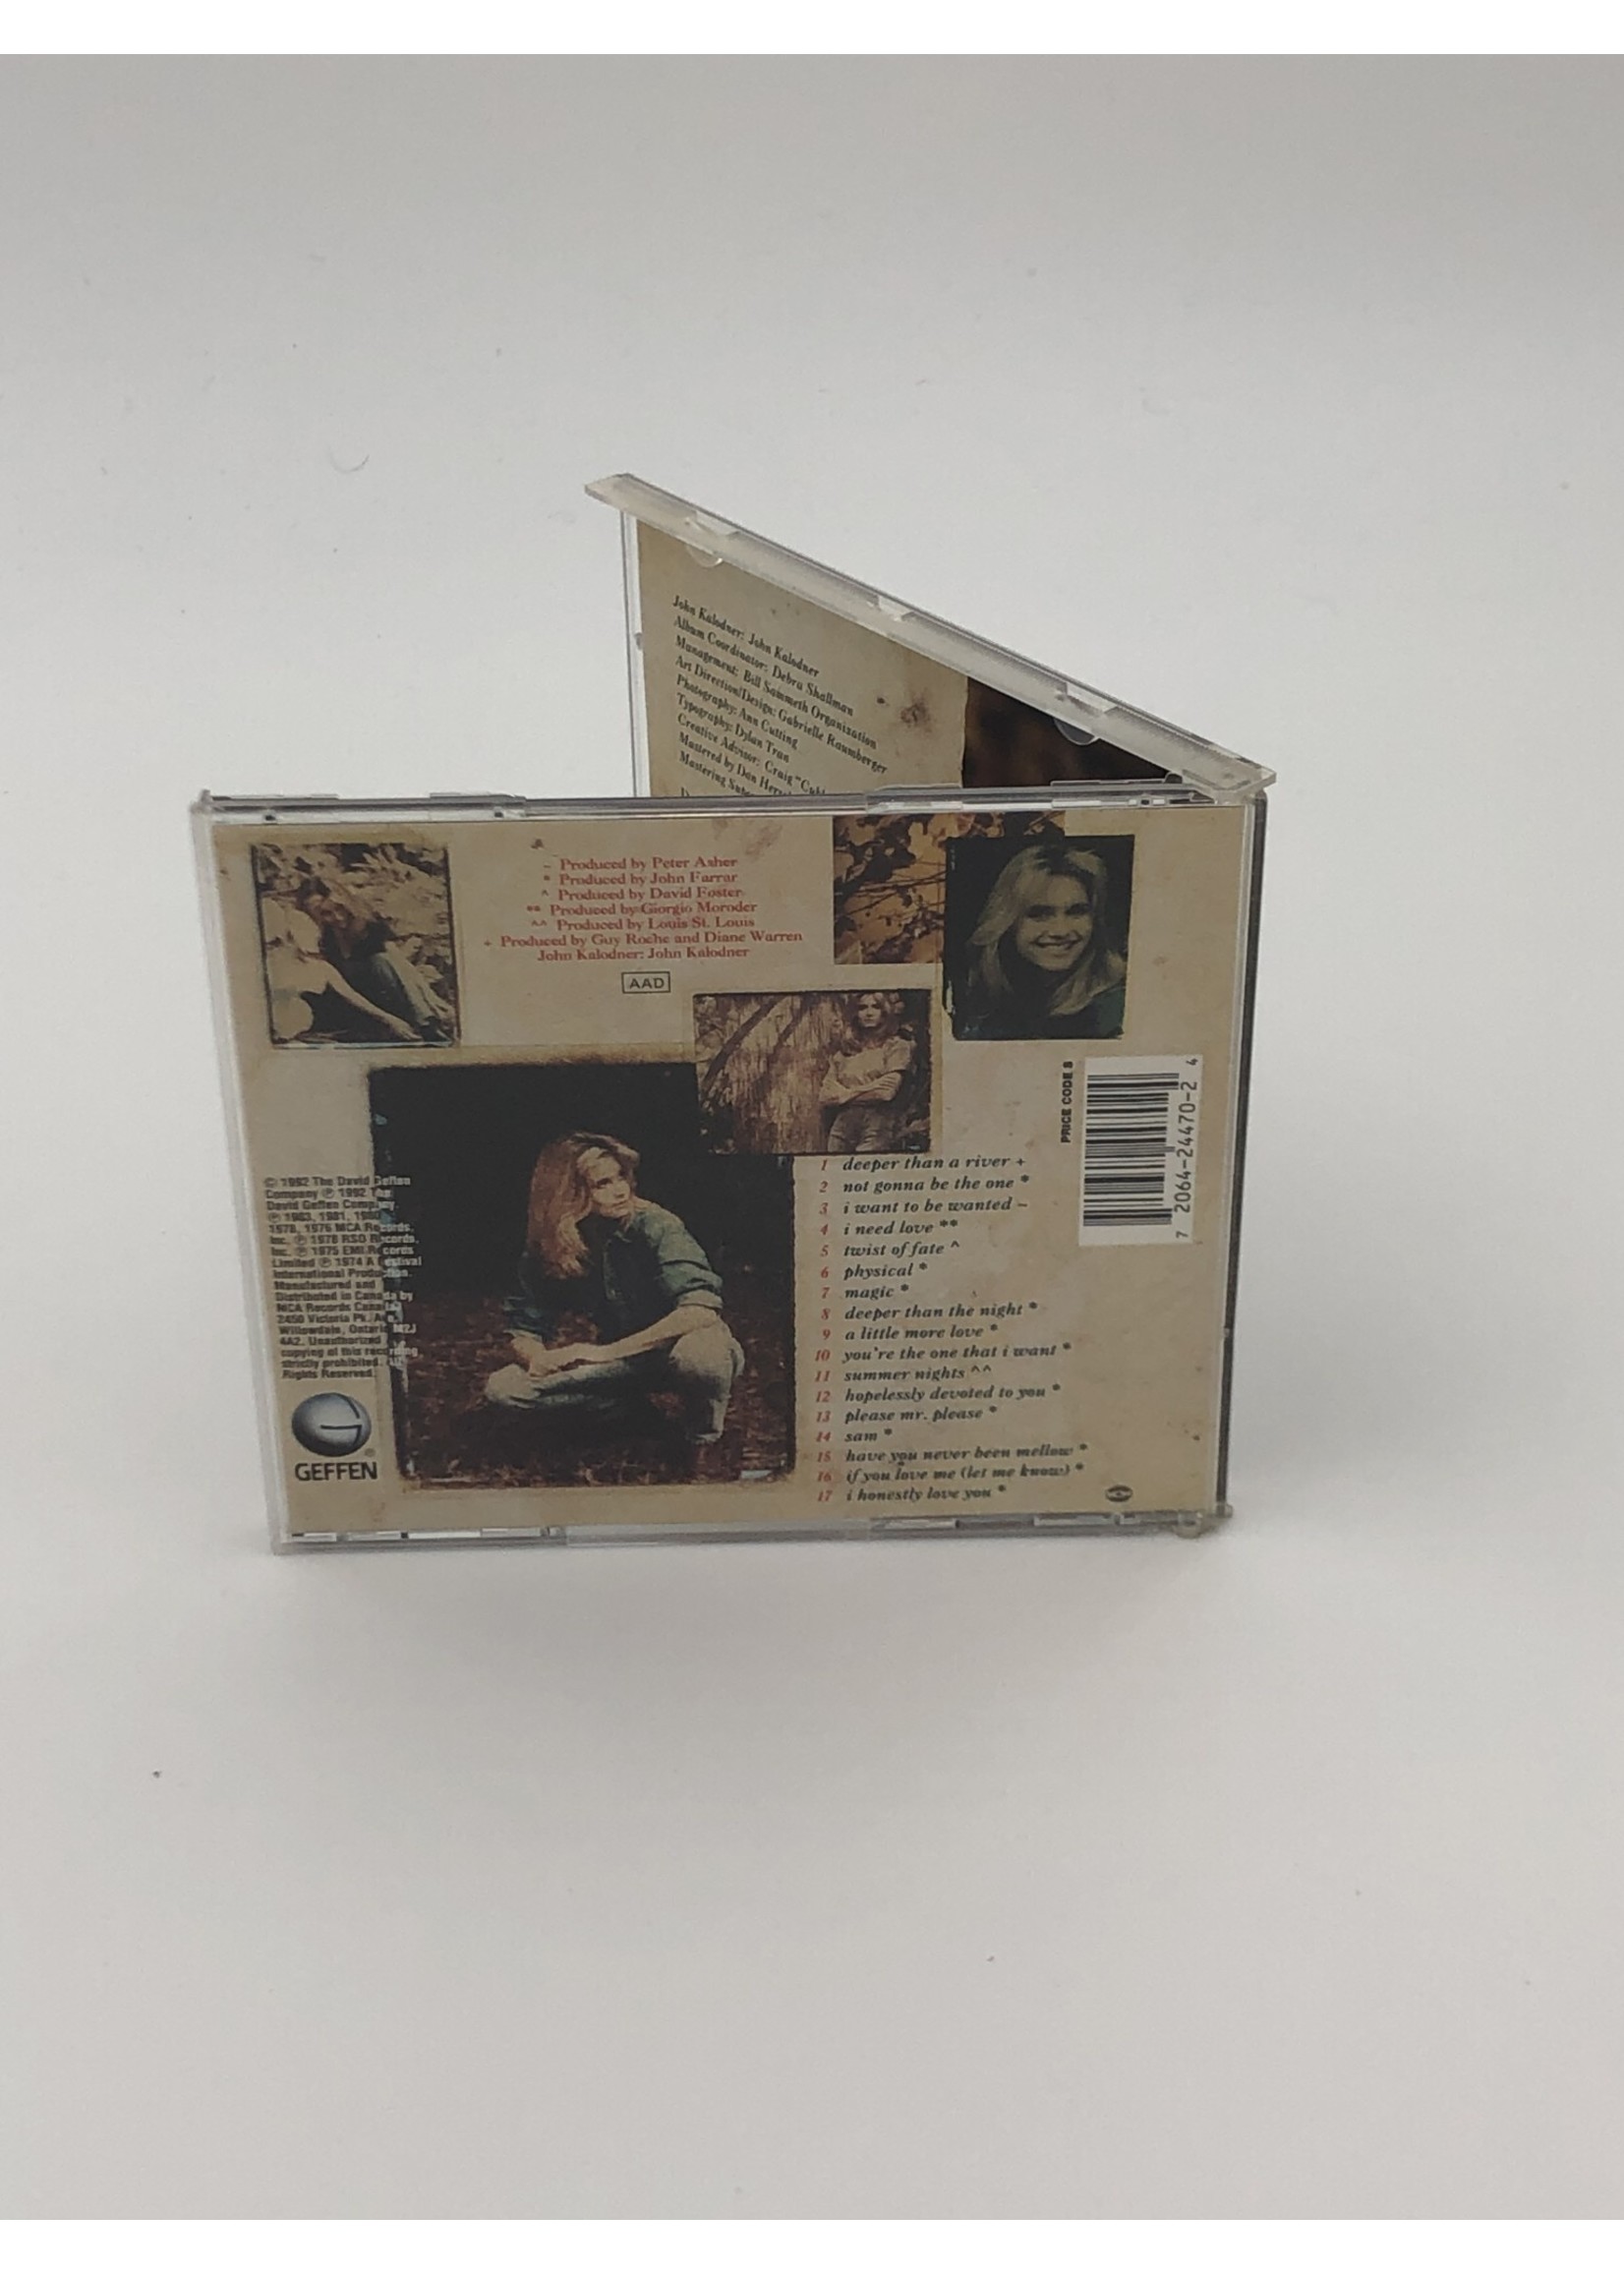 CD Olivia Newton John: Back To Basics: The Essential Collection 1971-1992 CD